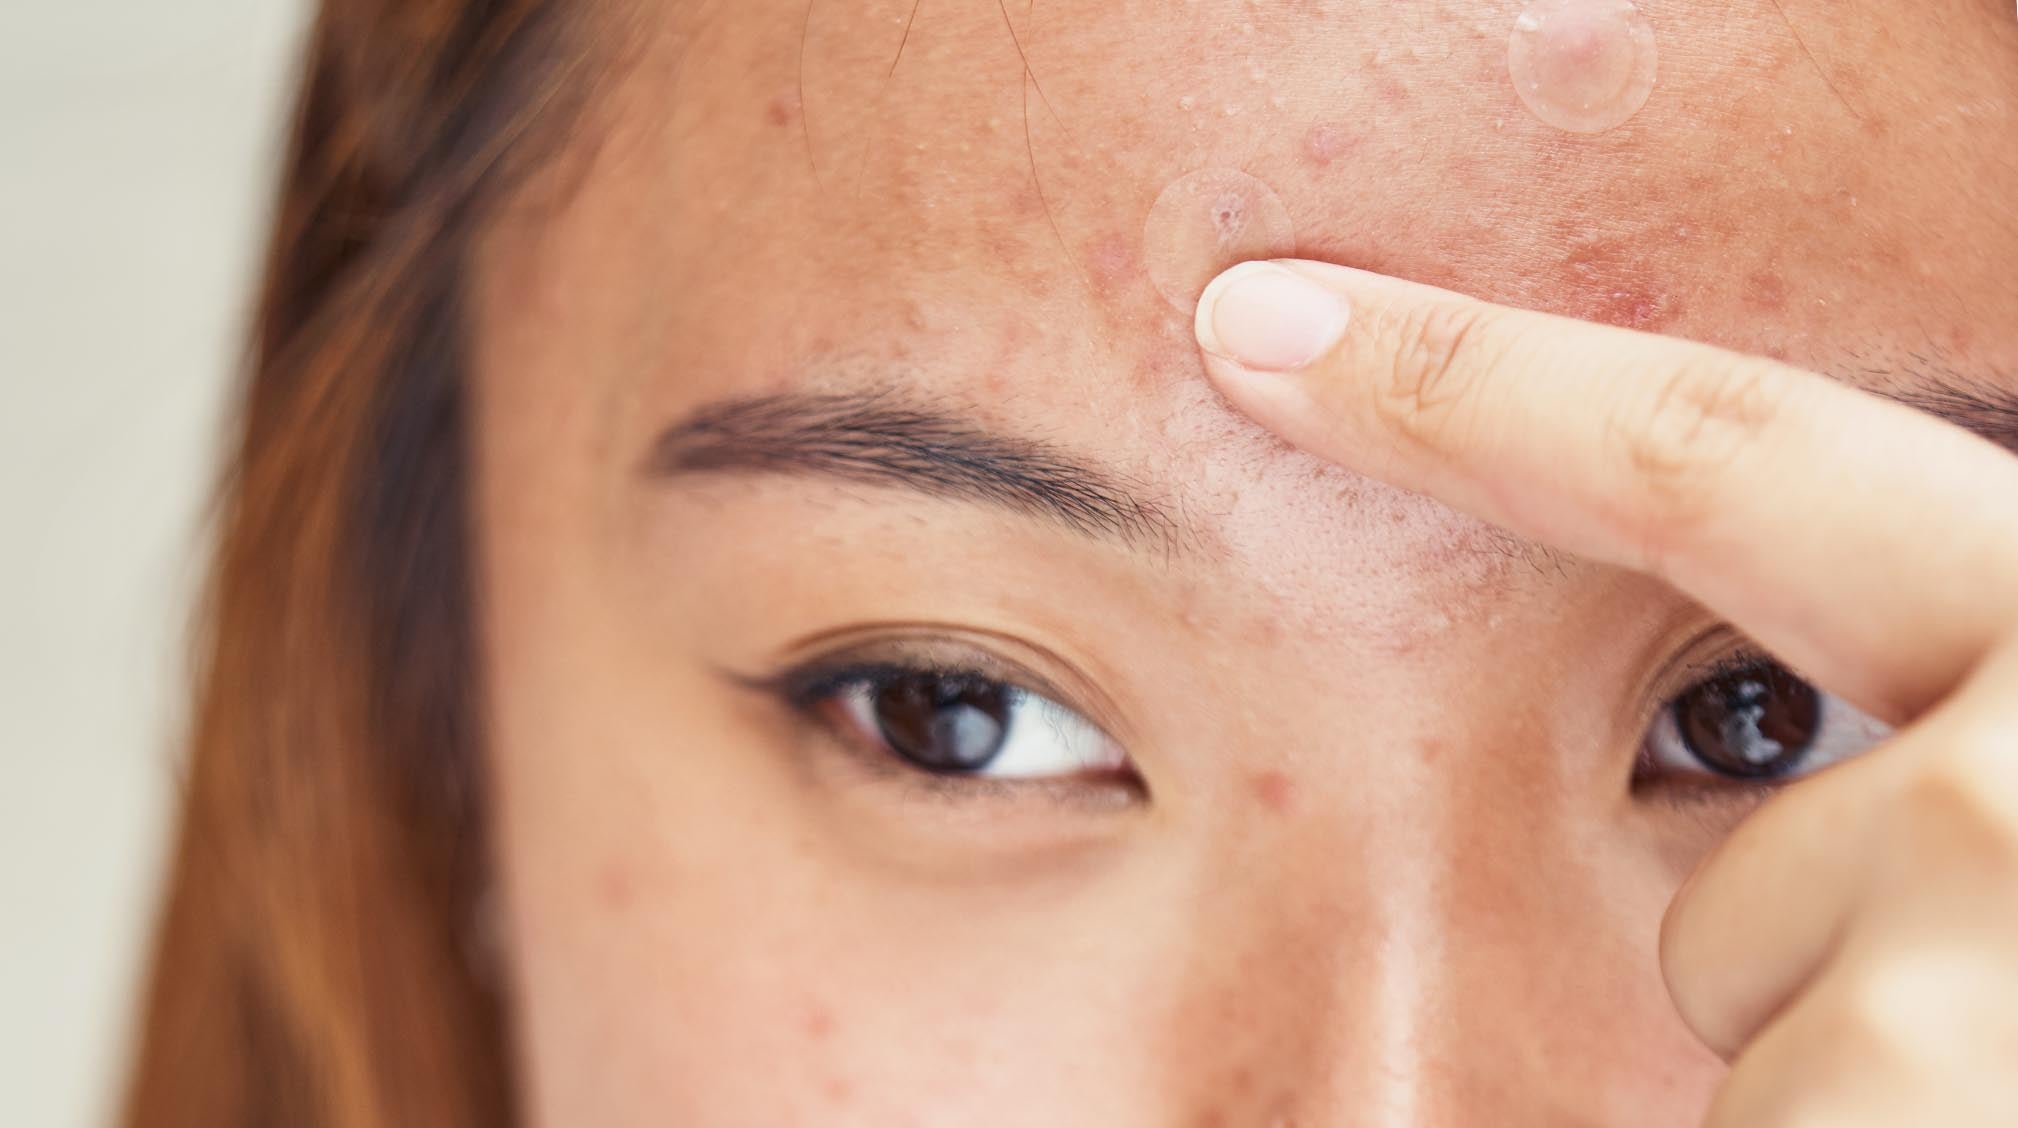 Woman pointing to acne on forehead